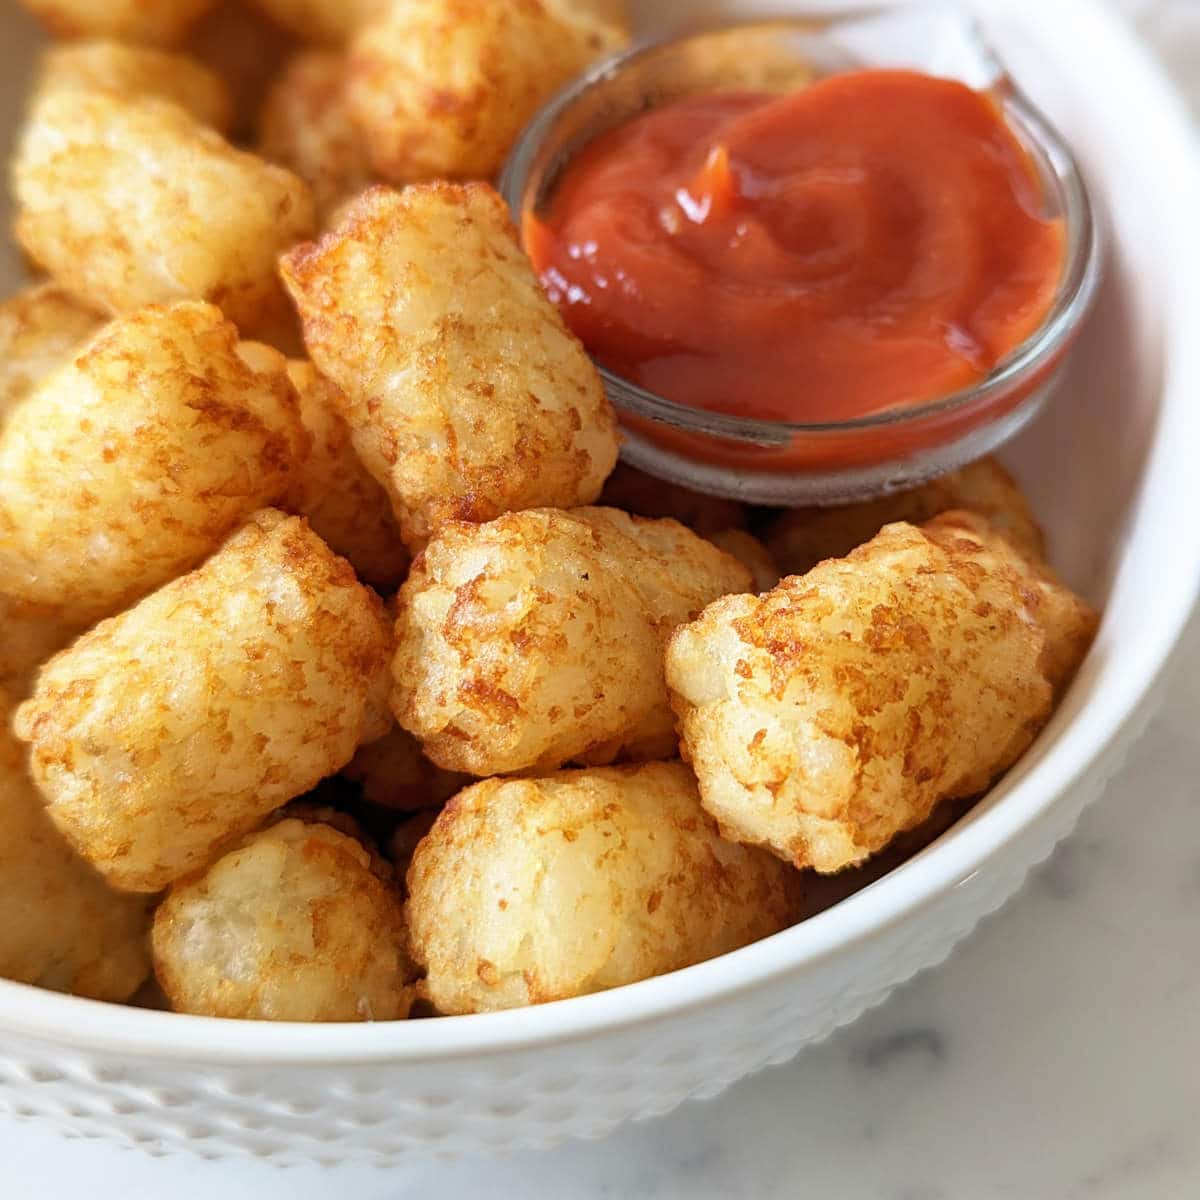 Golden air fried tater tots in a bowl with a side of ketchup.